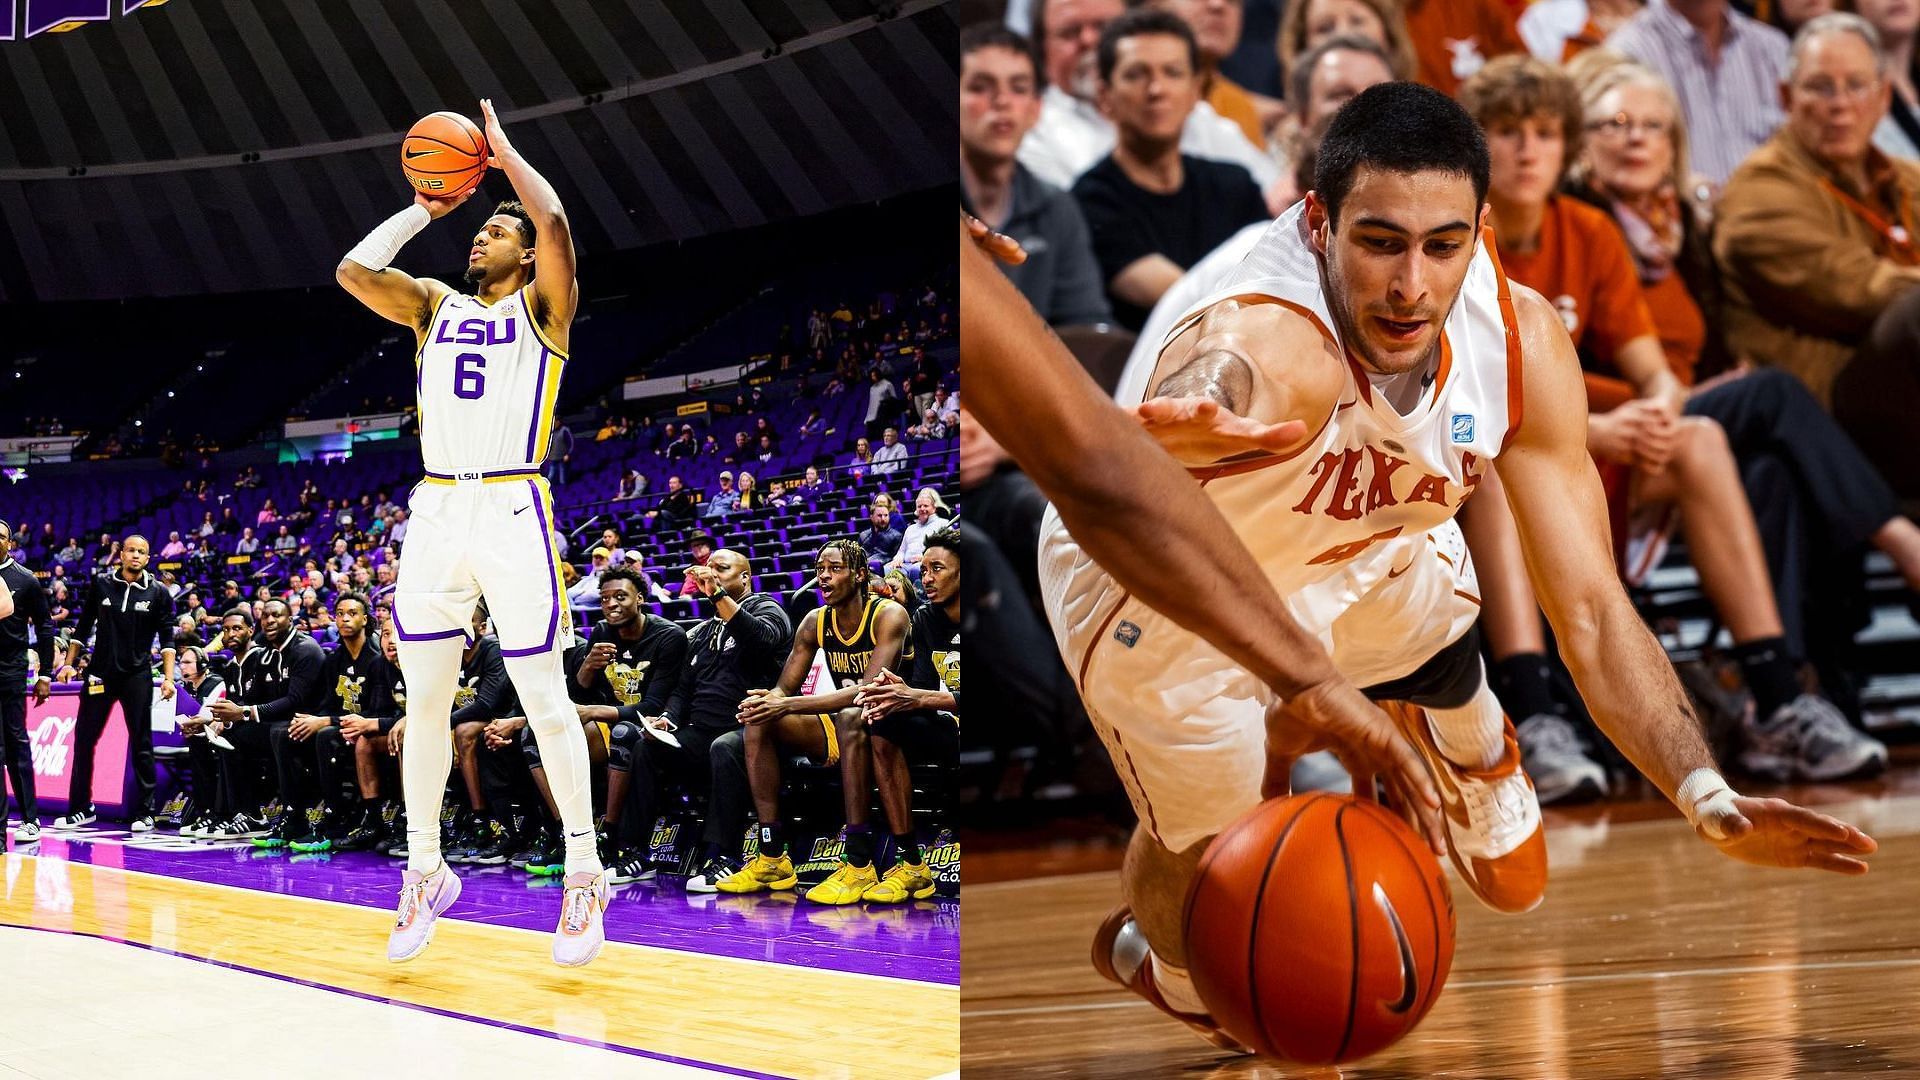 The Texas Longhorns face the LSU Tigers in Houston tomorrow